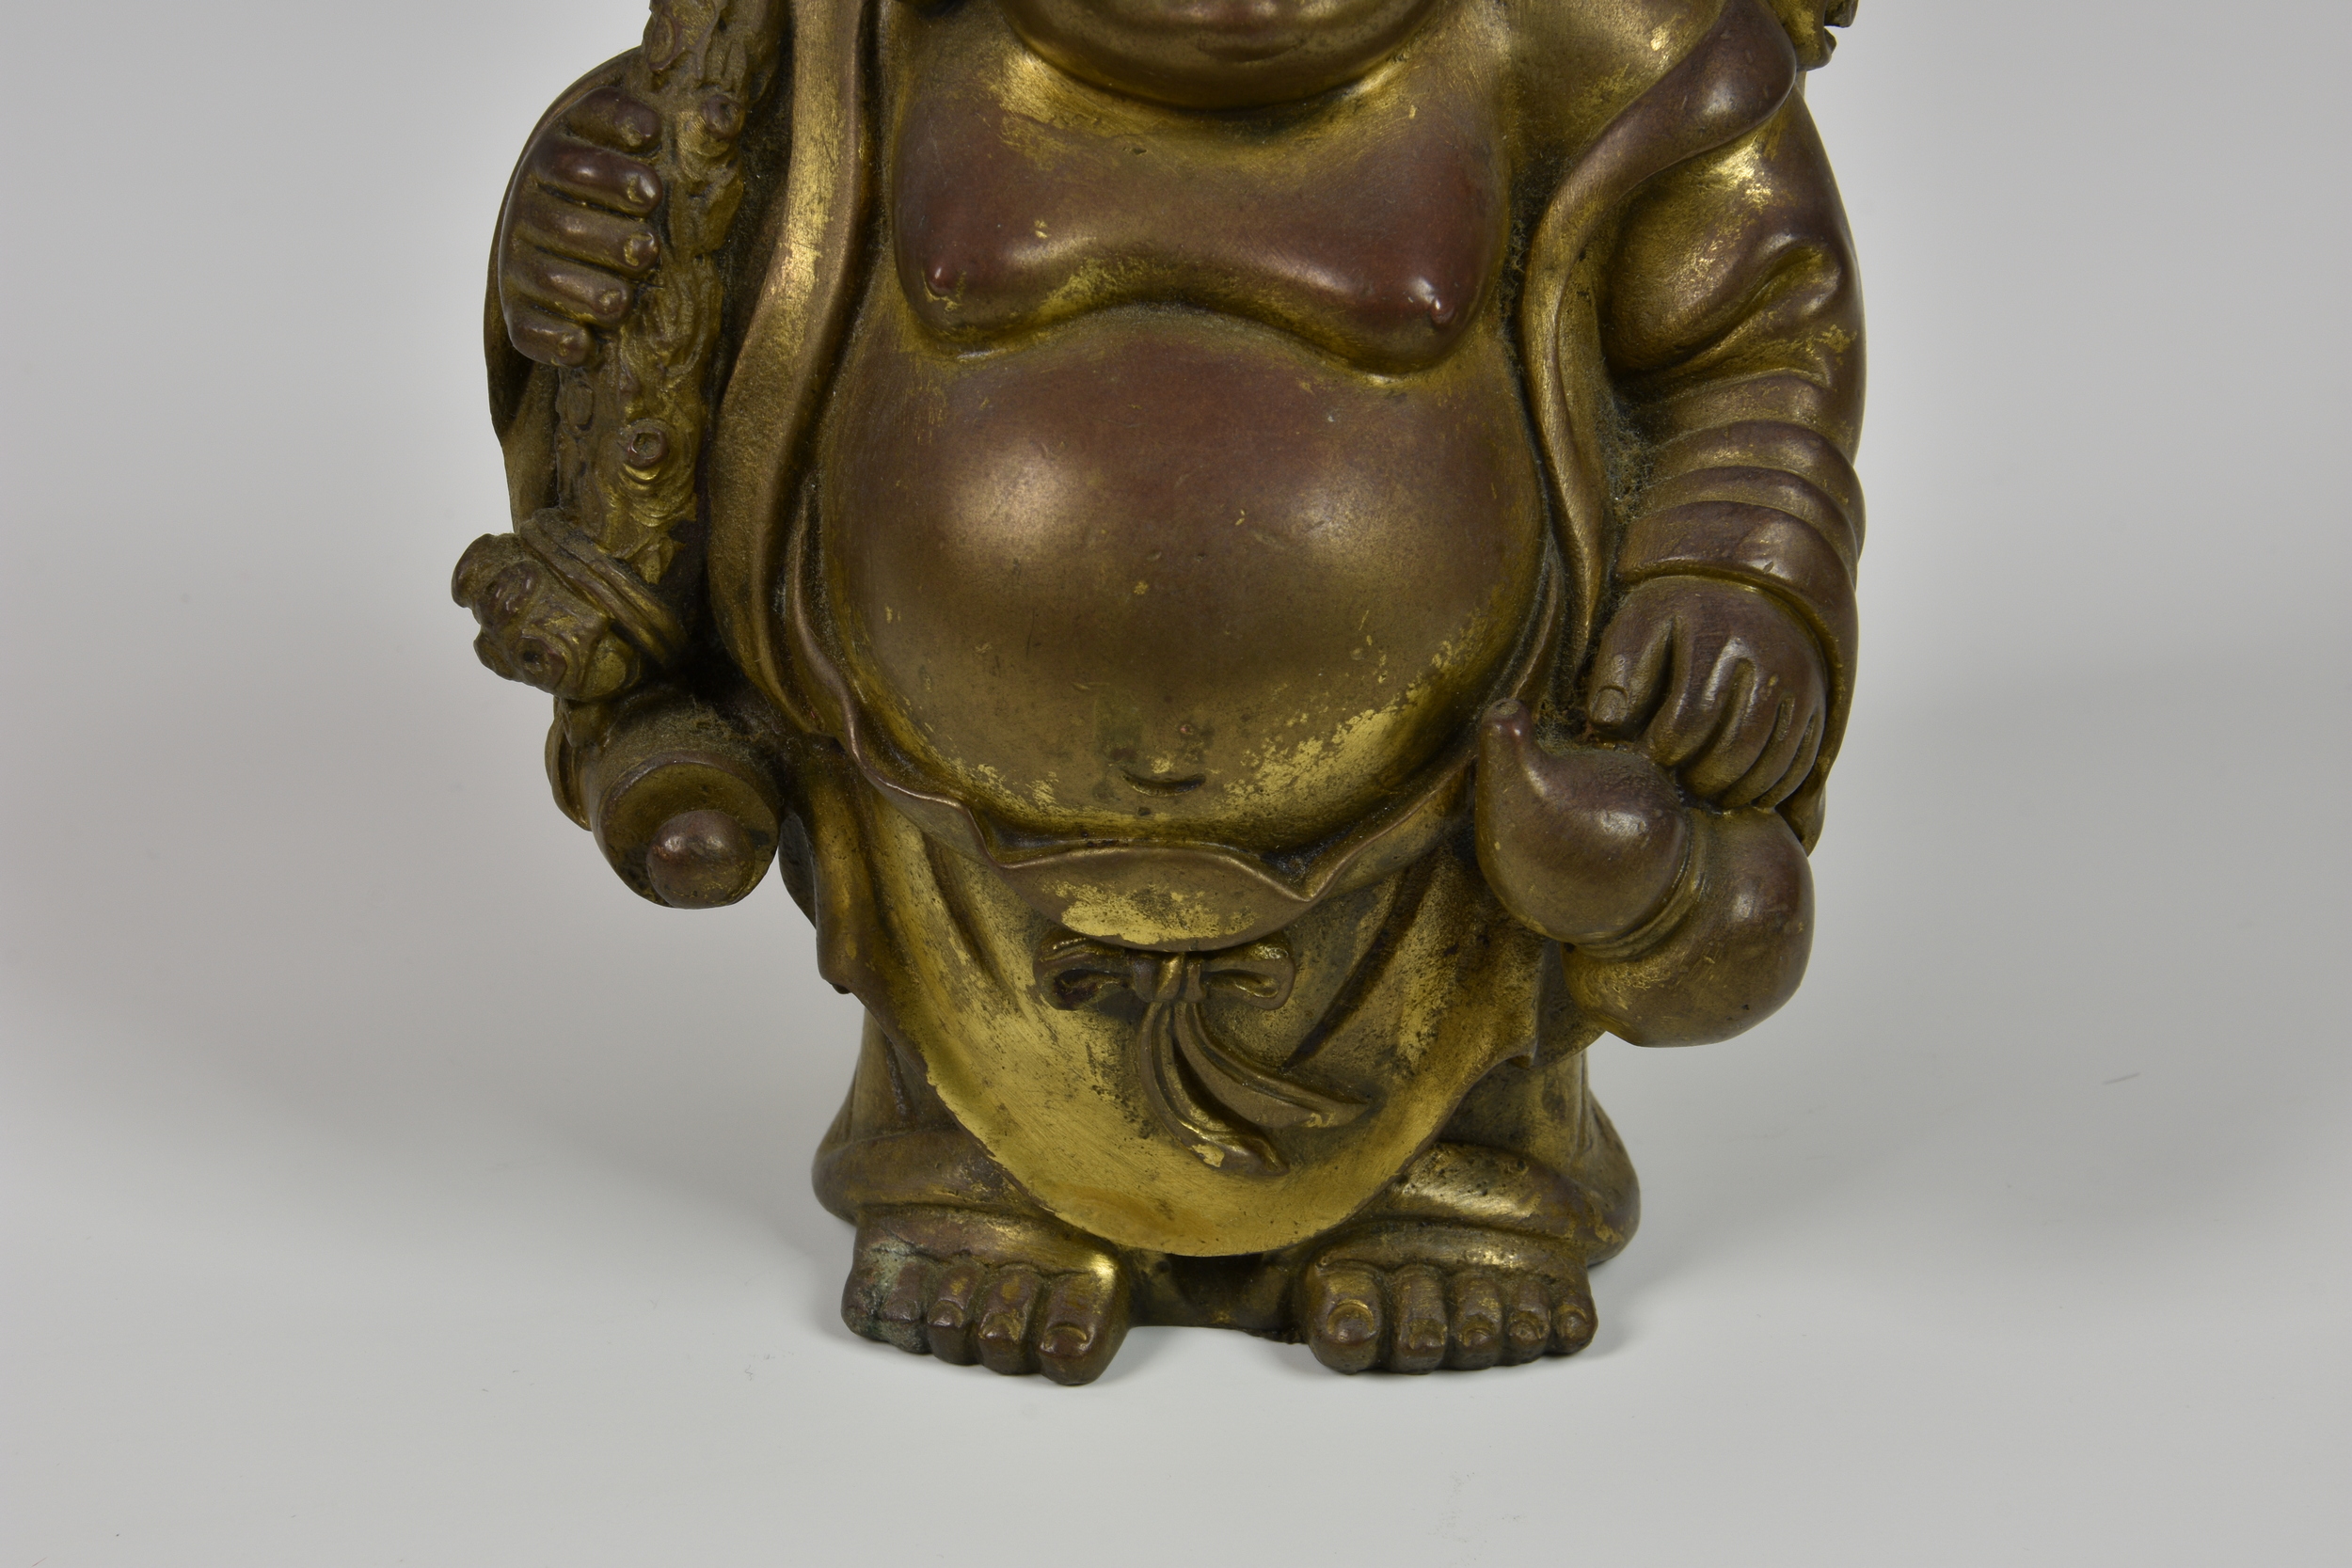 A Chinese gilt bronze buddha figure, probably early 20th century, modelled in standing position, - Image 7 of 7